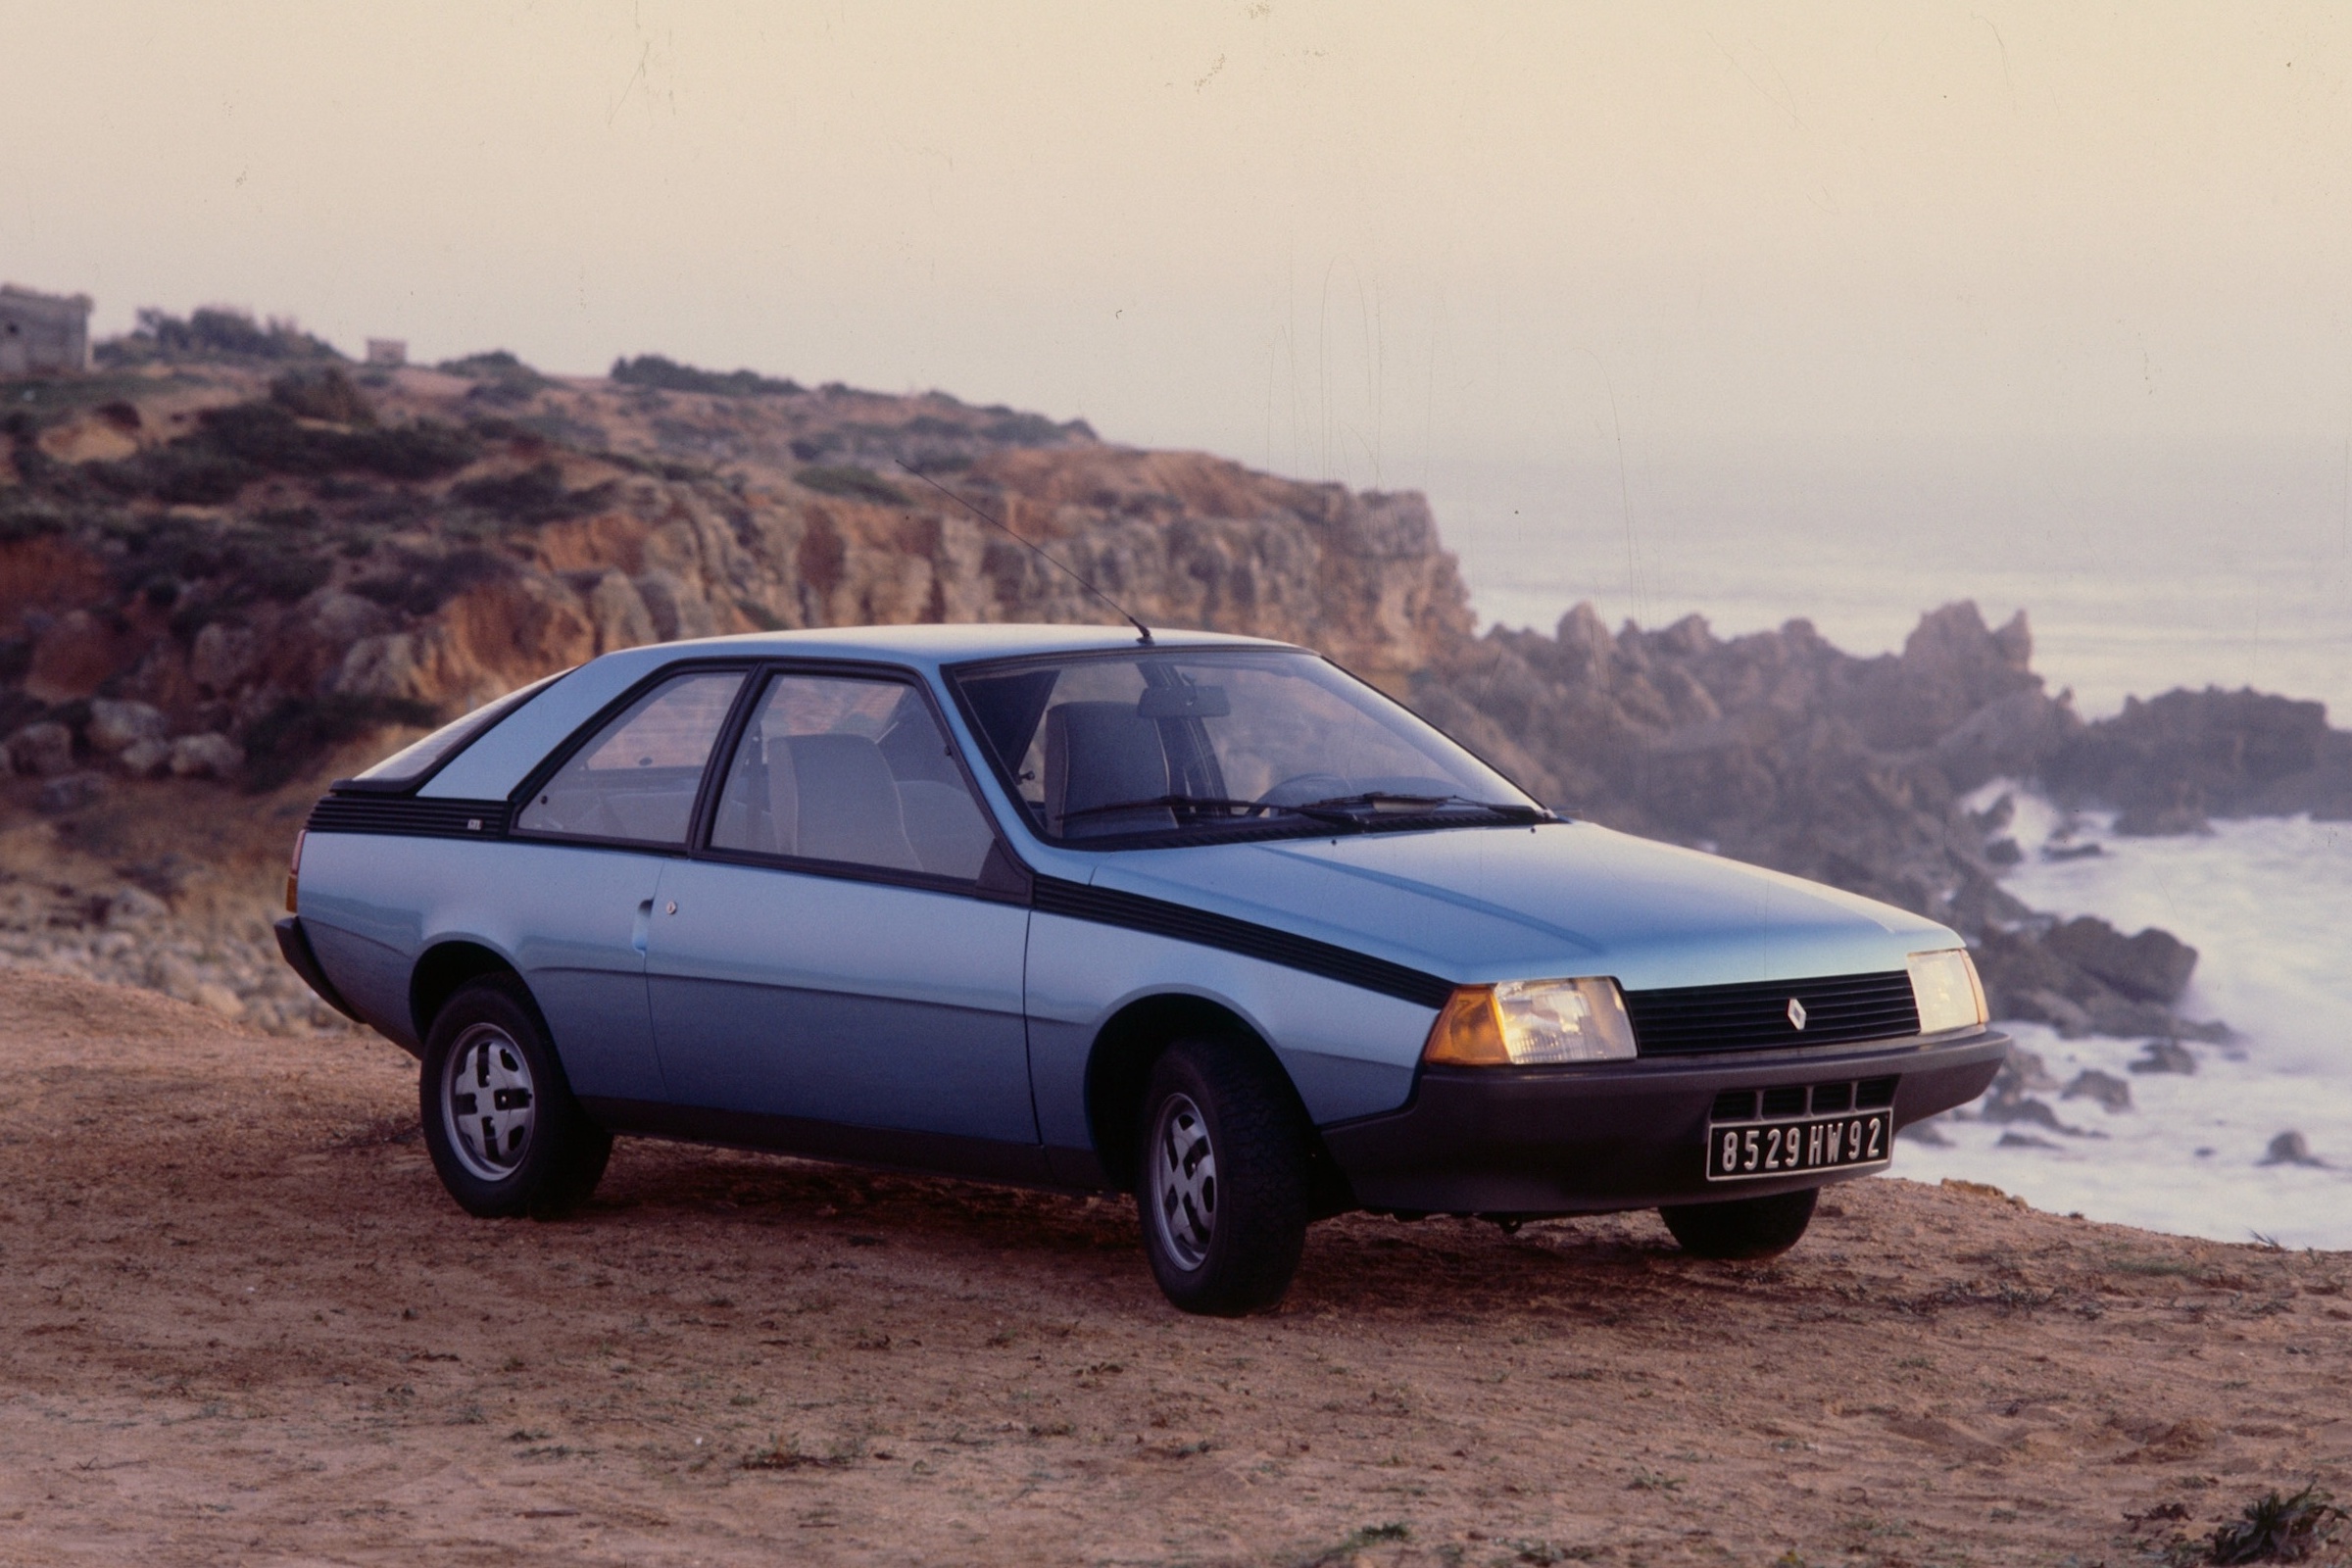 Renault Fuego and Turbo: Buying guide and review (1980 